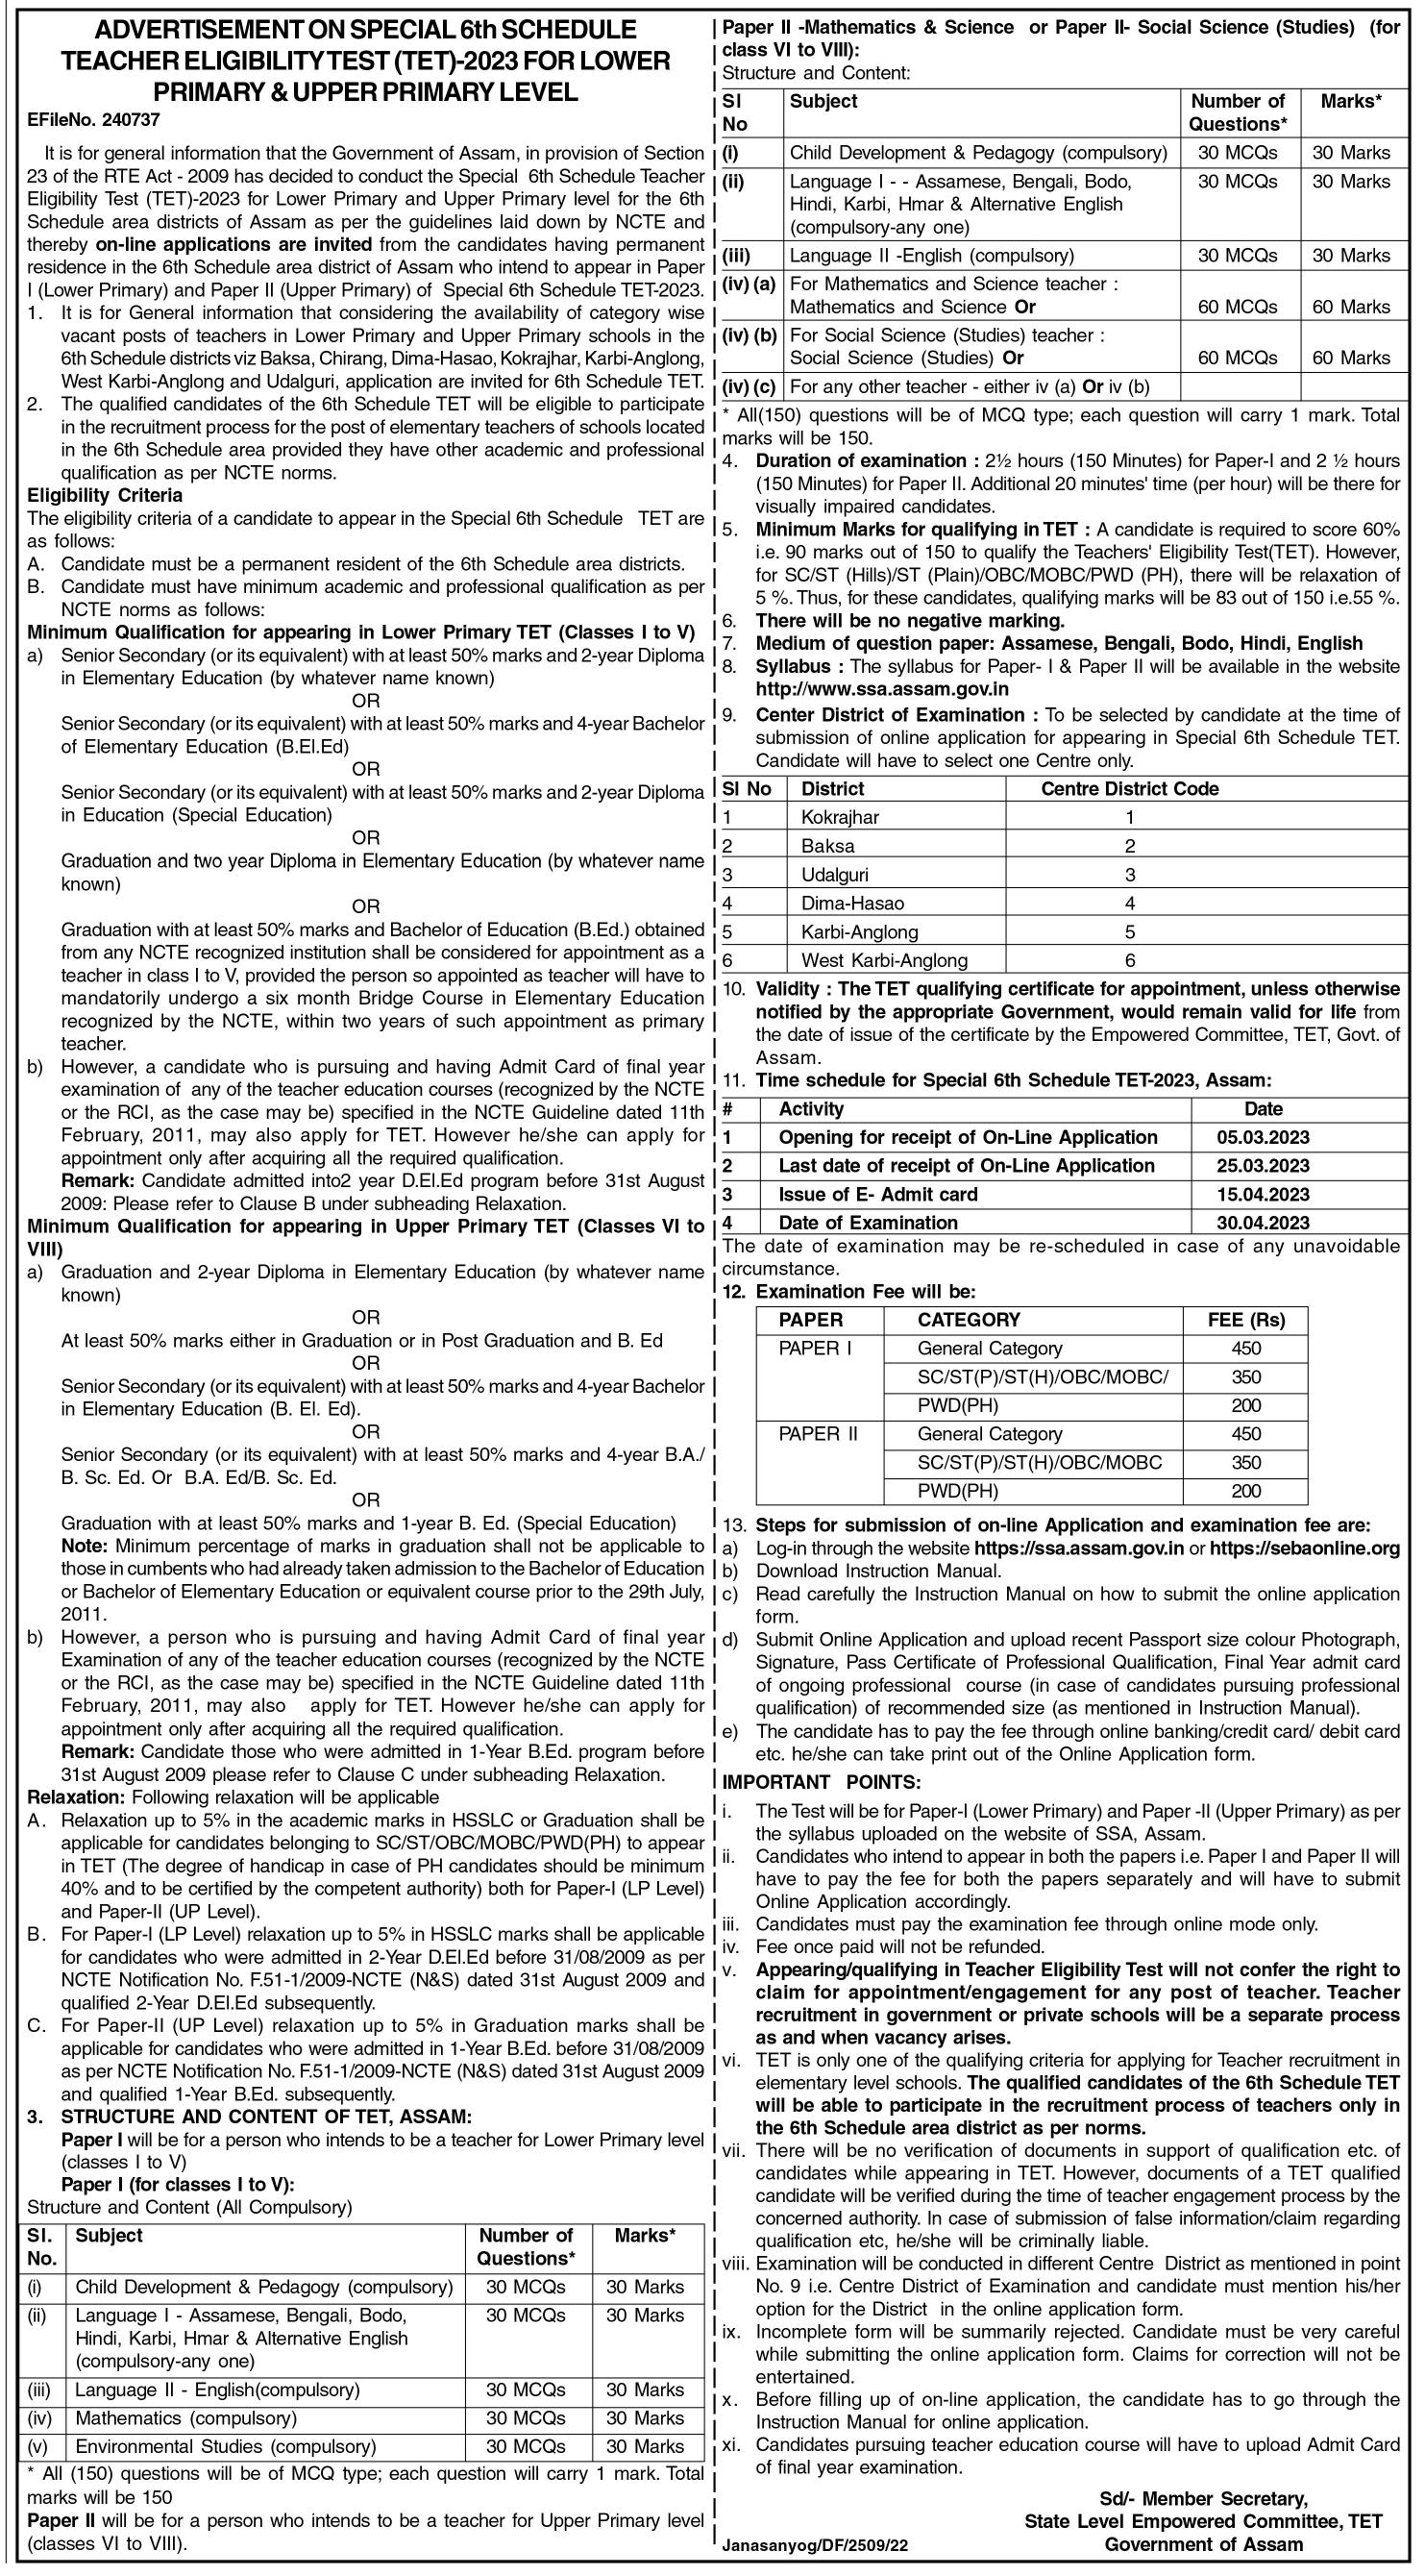 Assam TET 2023 Notification, Exam Date, Application Form, Eligibility - Page 1